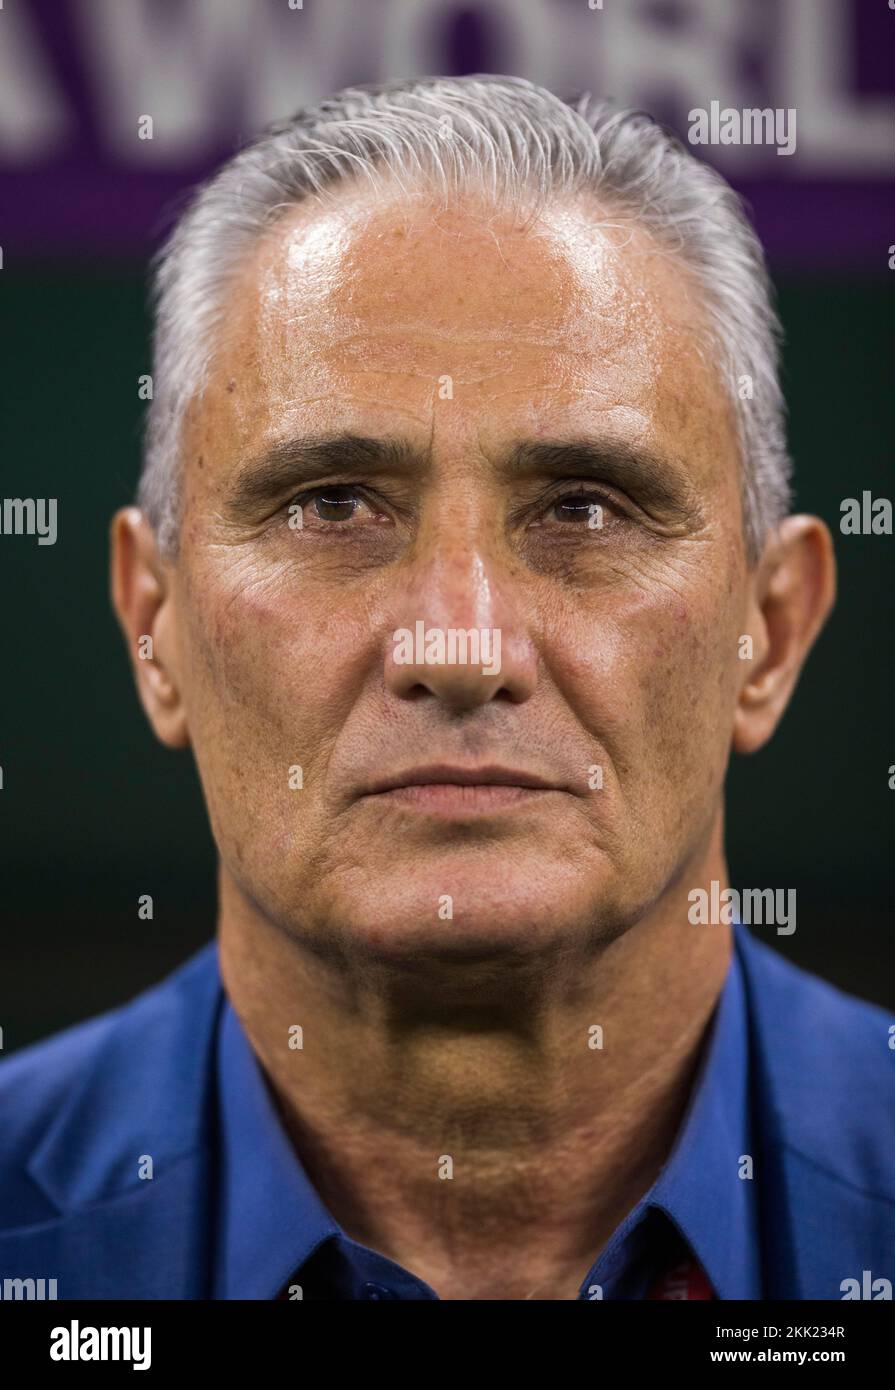 Doha, Qatar. 24th Nov, 2022.  Trainer Tite (Brasilien) with tears in his eyes during Brazil's national anthem Brazil - Serbia  World Cup 2022 in Qatar Stock Photo